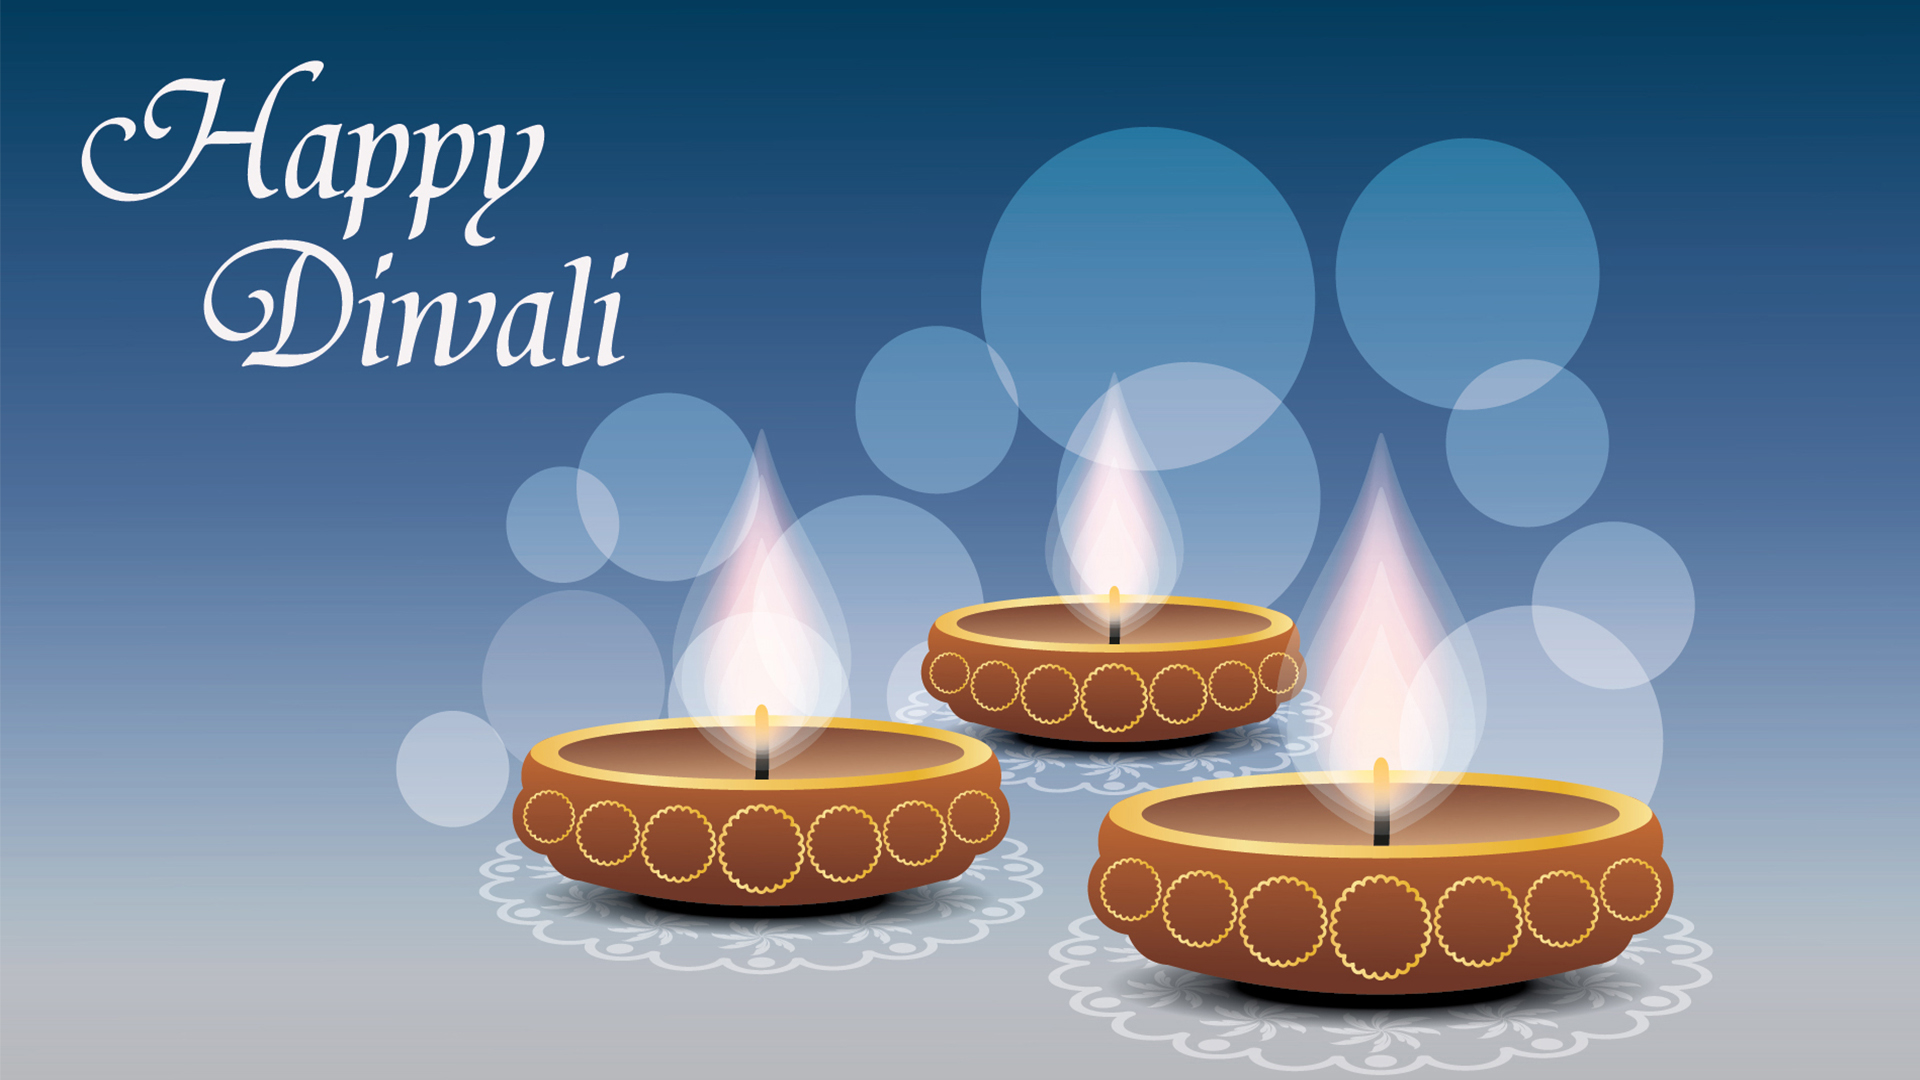 Happy Diwali Images & HD Pictures | Diwali Wishes & Greetings